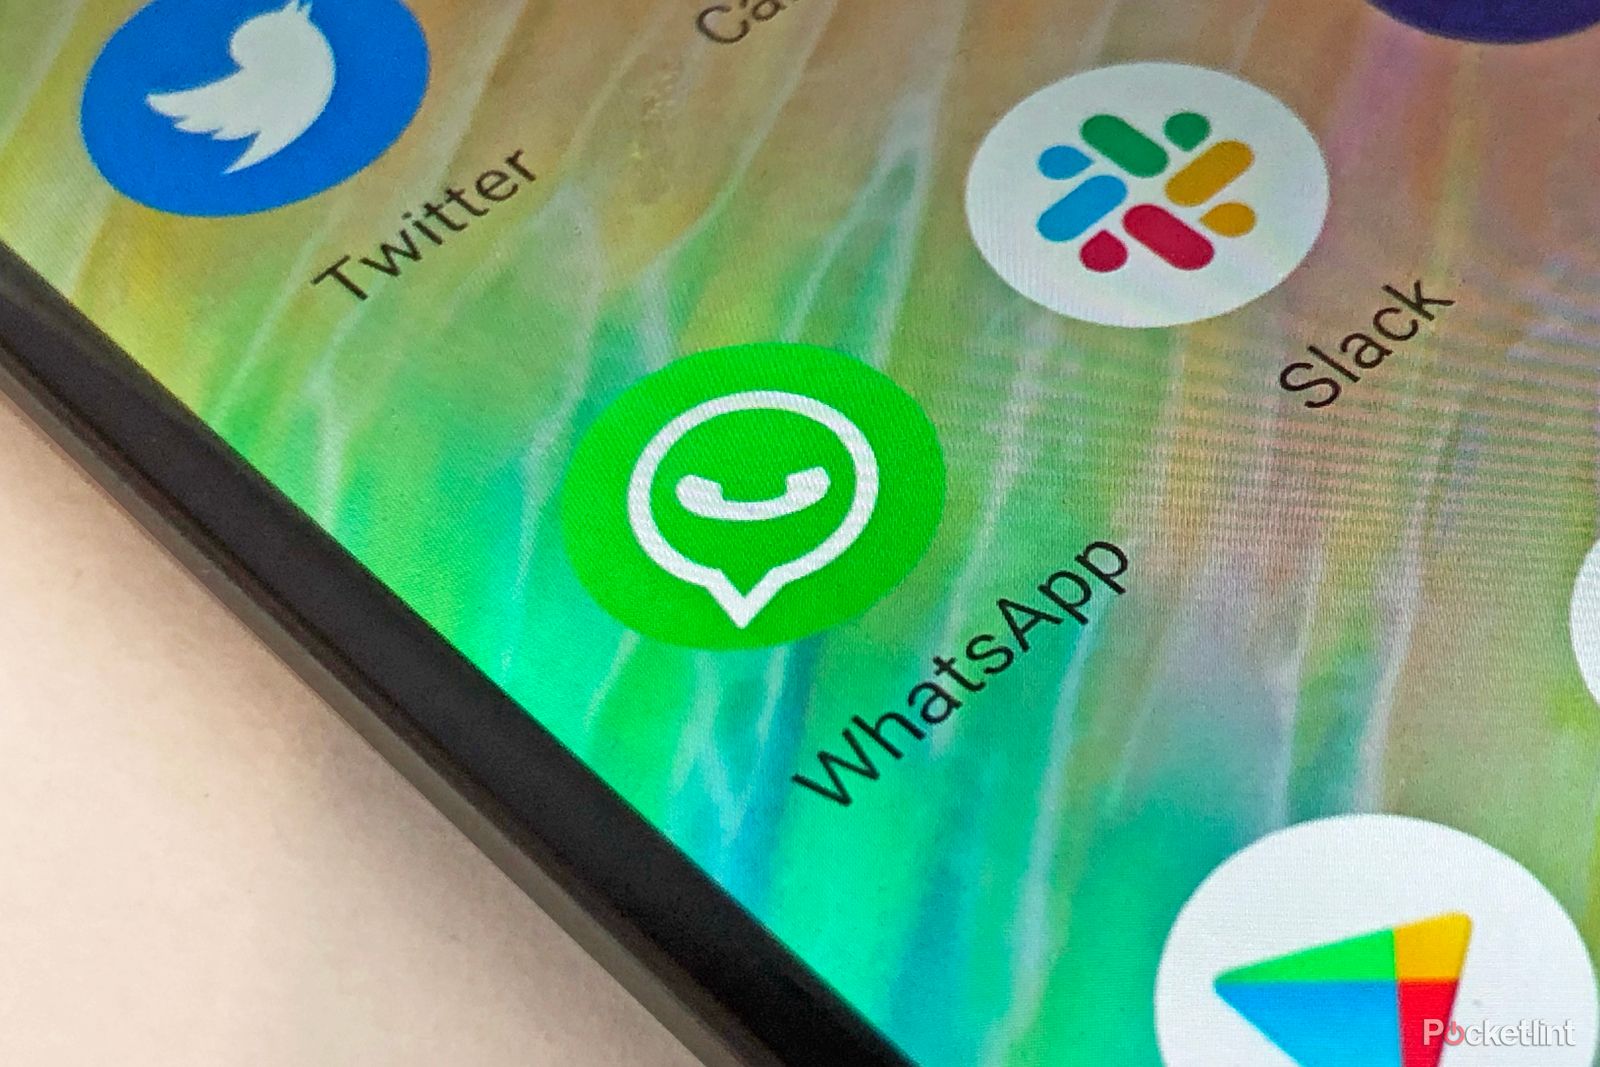 WhatsApp group admins can now choose who to allow in and who to block